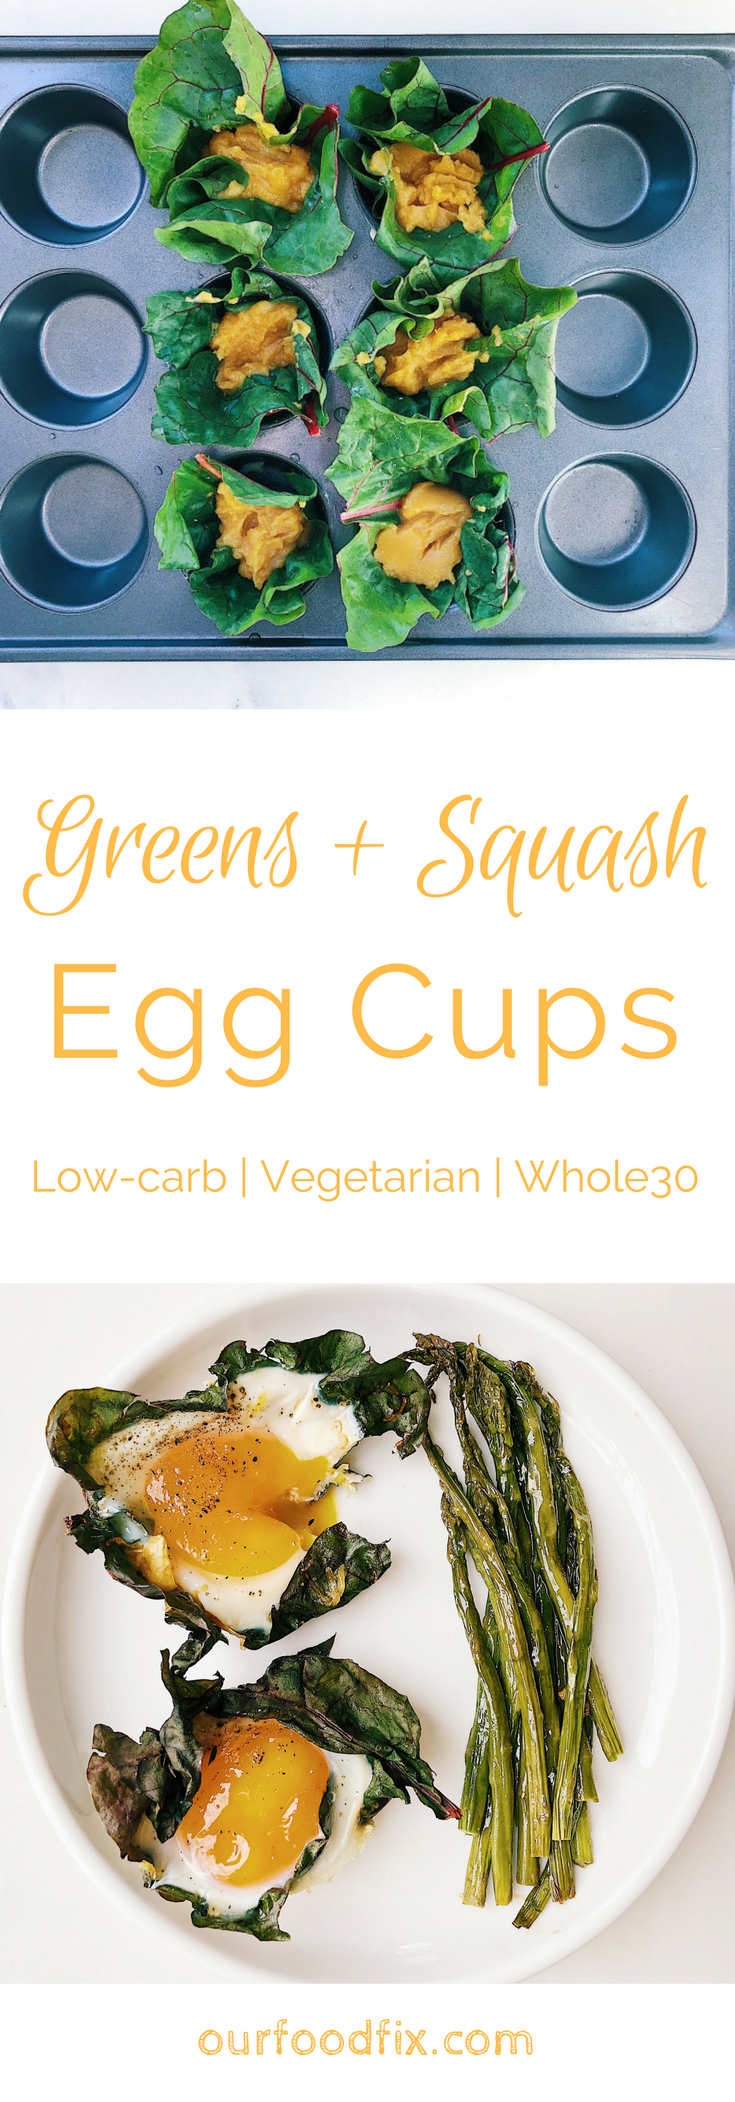 Including a serving of fresh greens, a little bit of healthy starch, and protein, these Greens + Squash Egg Cups are the perfect all-in-one breakfast or snack #Whole30 #JanuaryWhole30 #PaleoRecipes #theWRlife | Seriously simple recipe | Paleo breakfast recipes | Egg cup recipes | Whole30 recipes | Breakfast and brunch | Make ahead meals | Meal prep | Menu and meal planning | Egg recipes | Under 30 minute recipes | Easy recipes